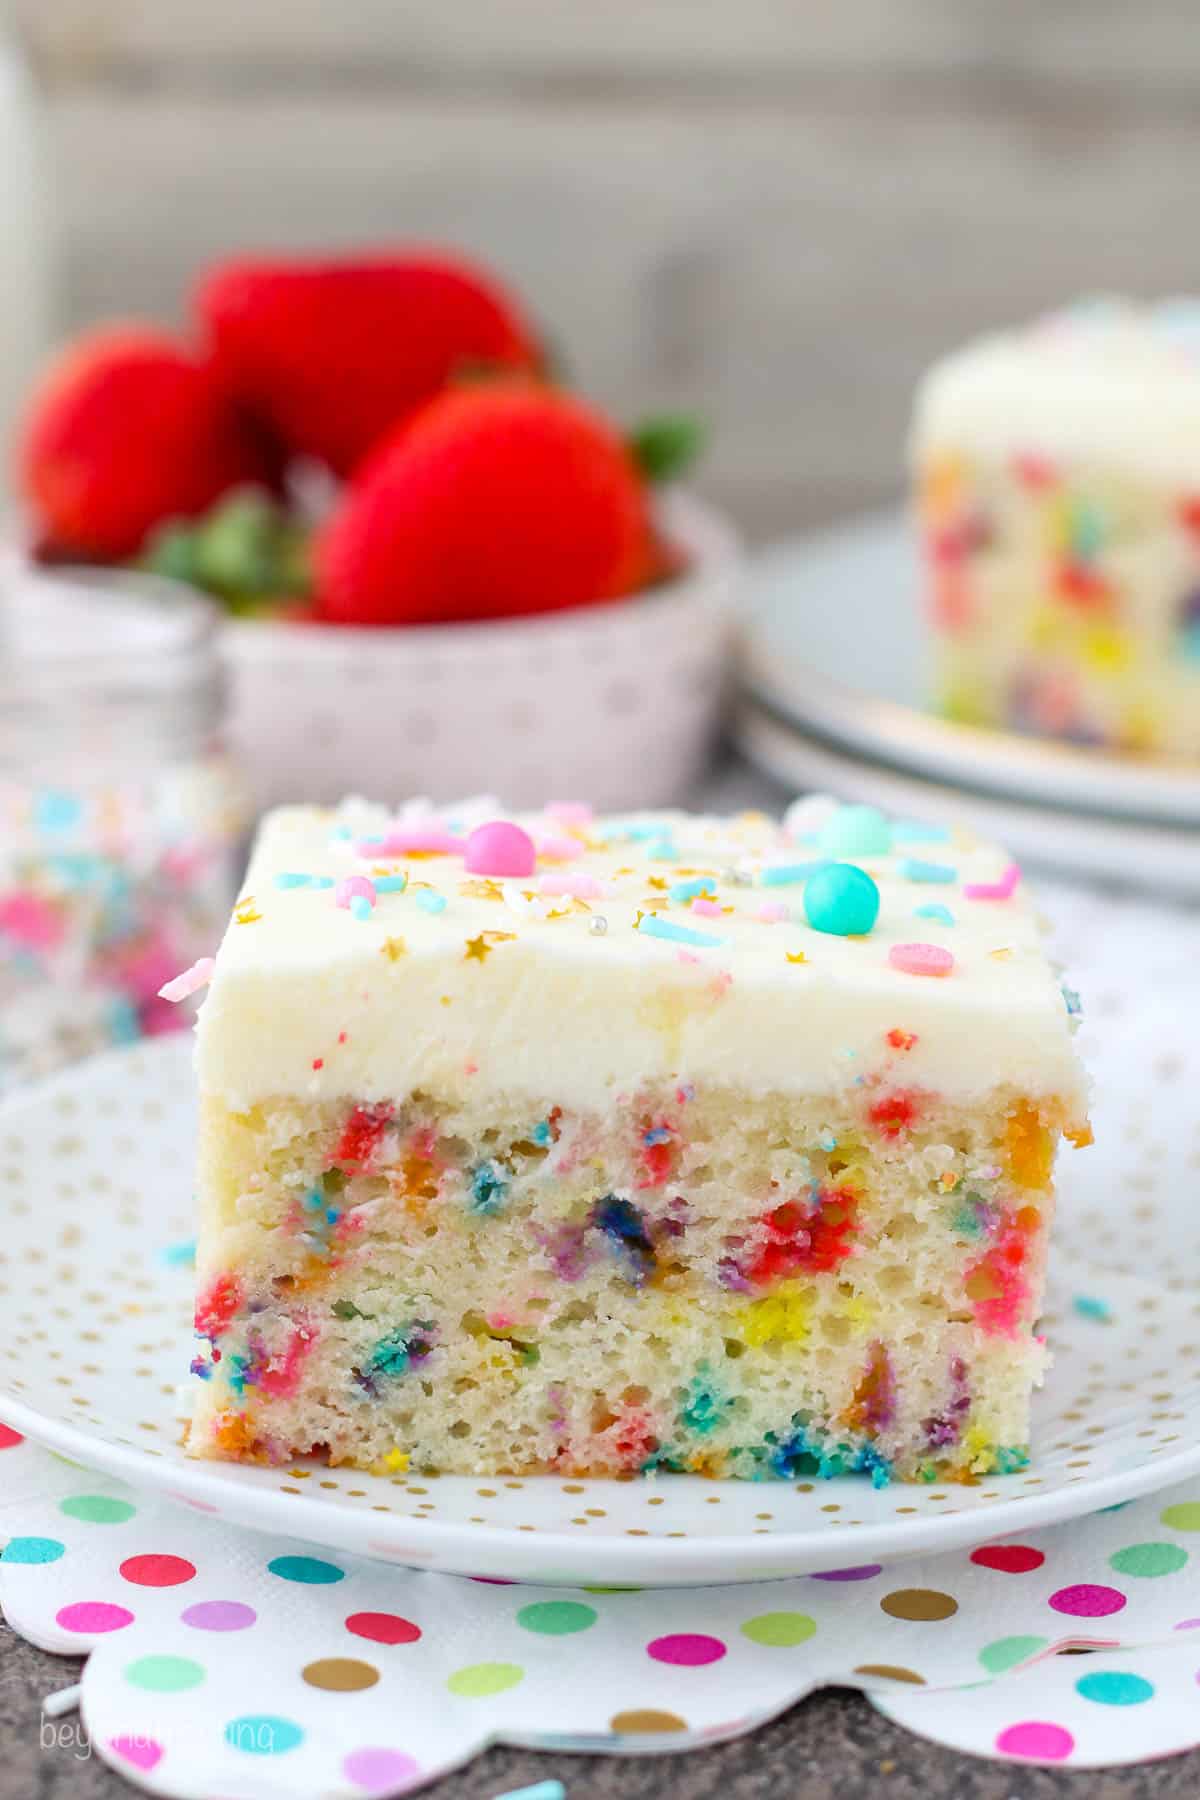 a slice of cake on a plate with sprinkles